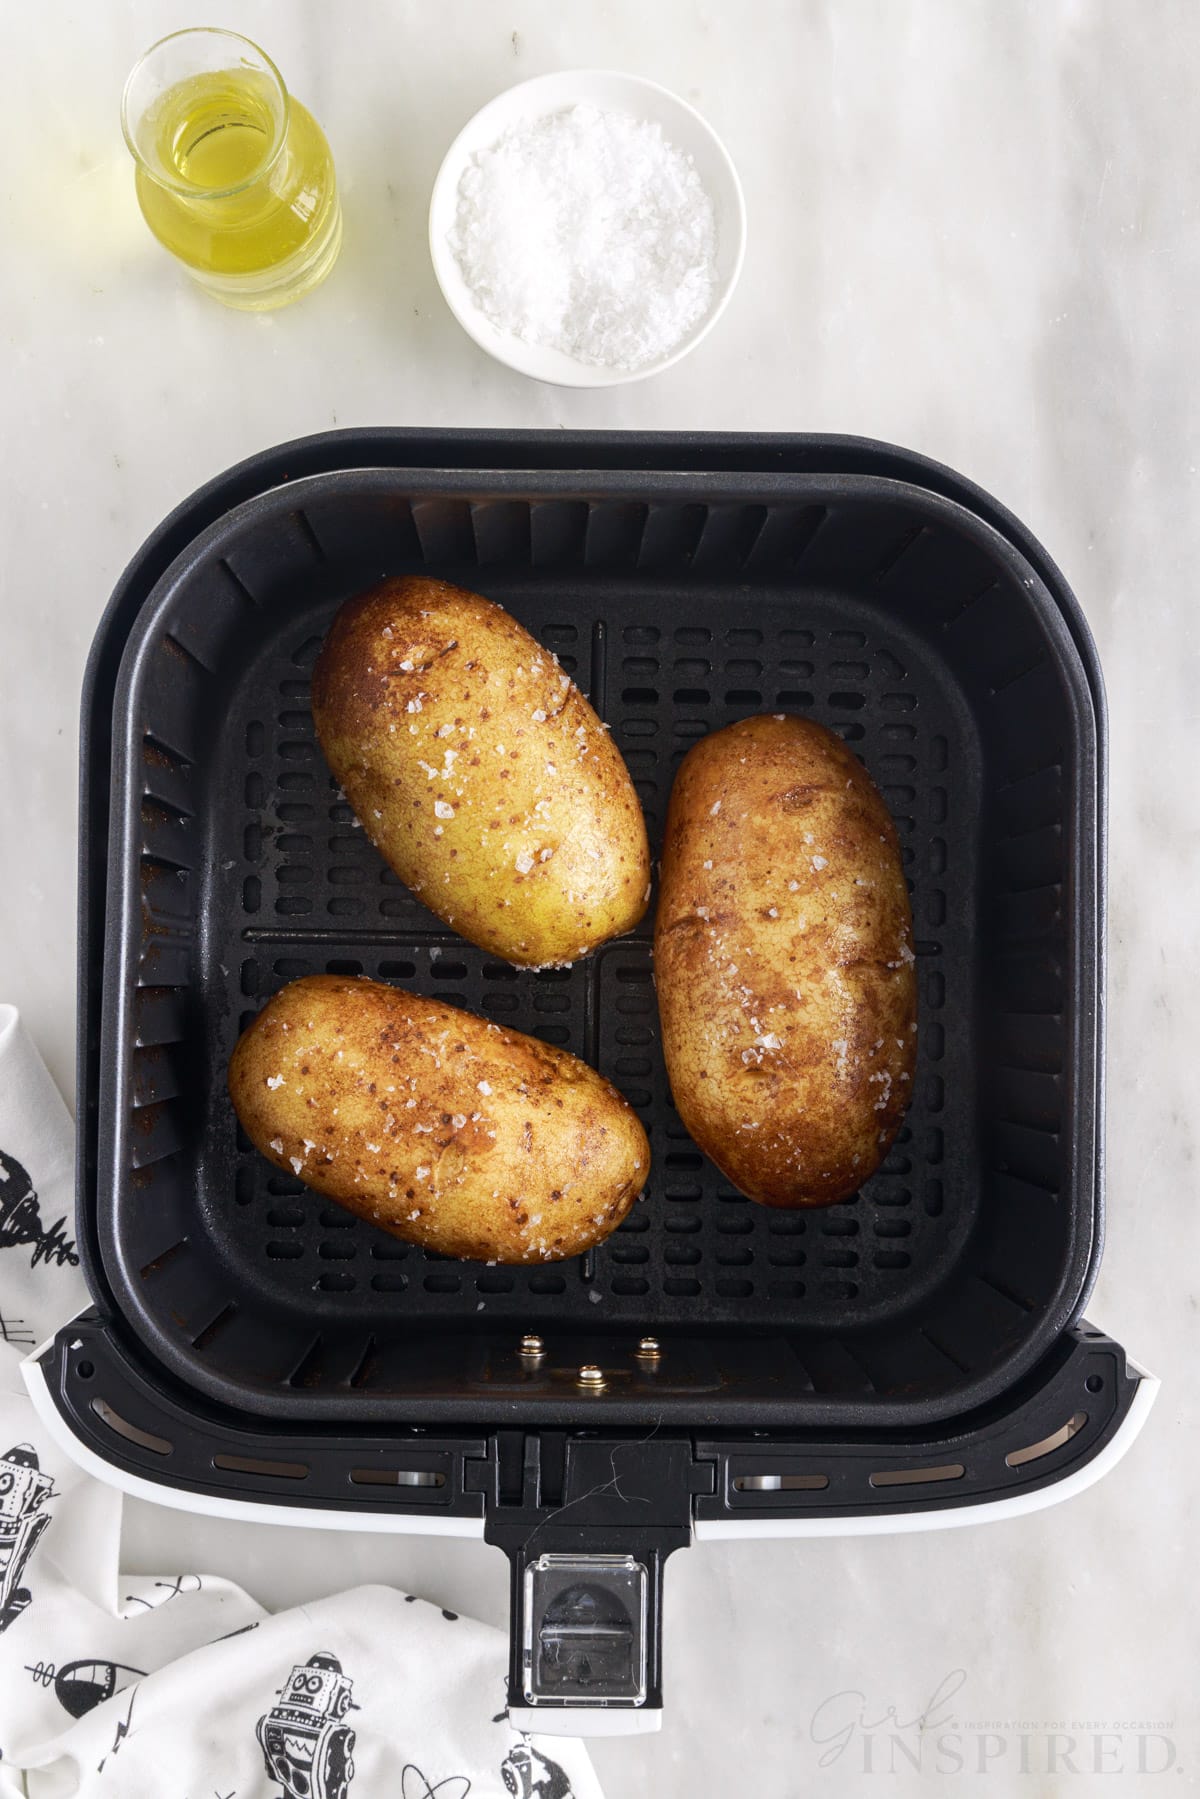 three russet potatoes in an air fryer basket before cooking